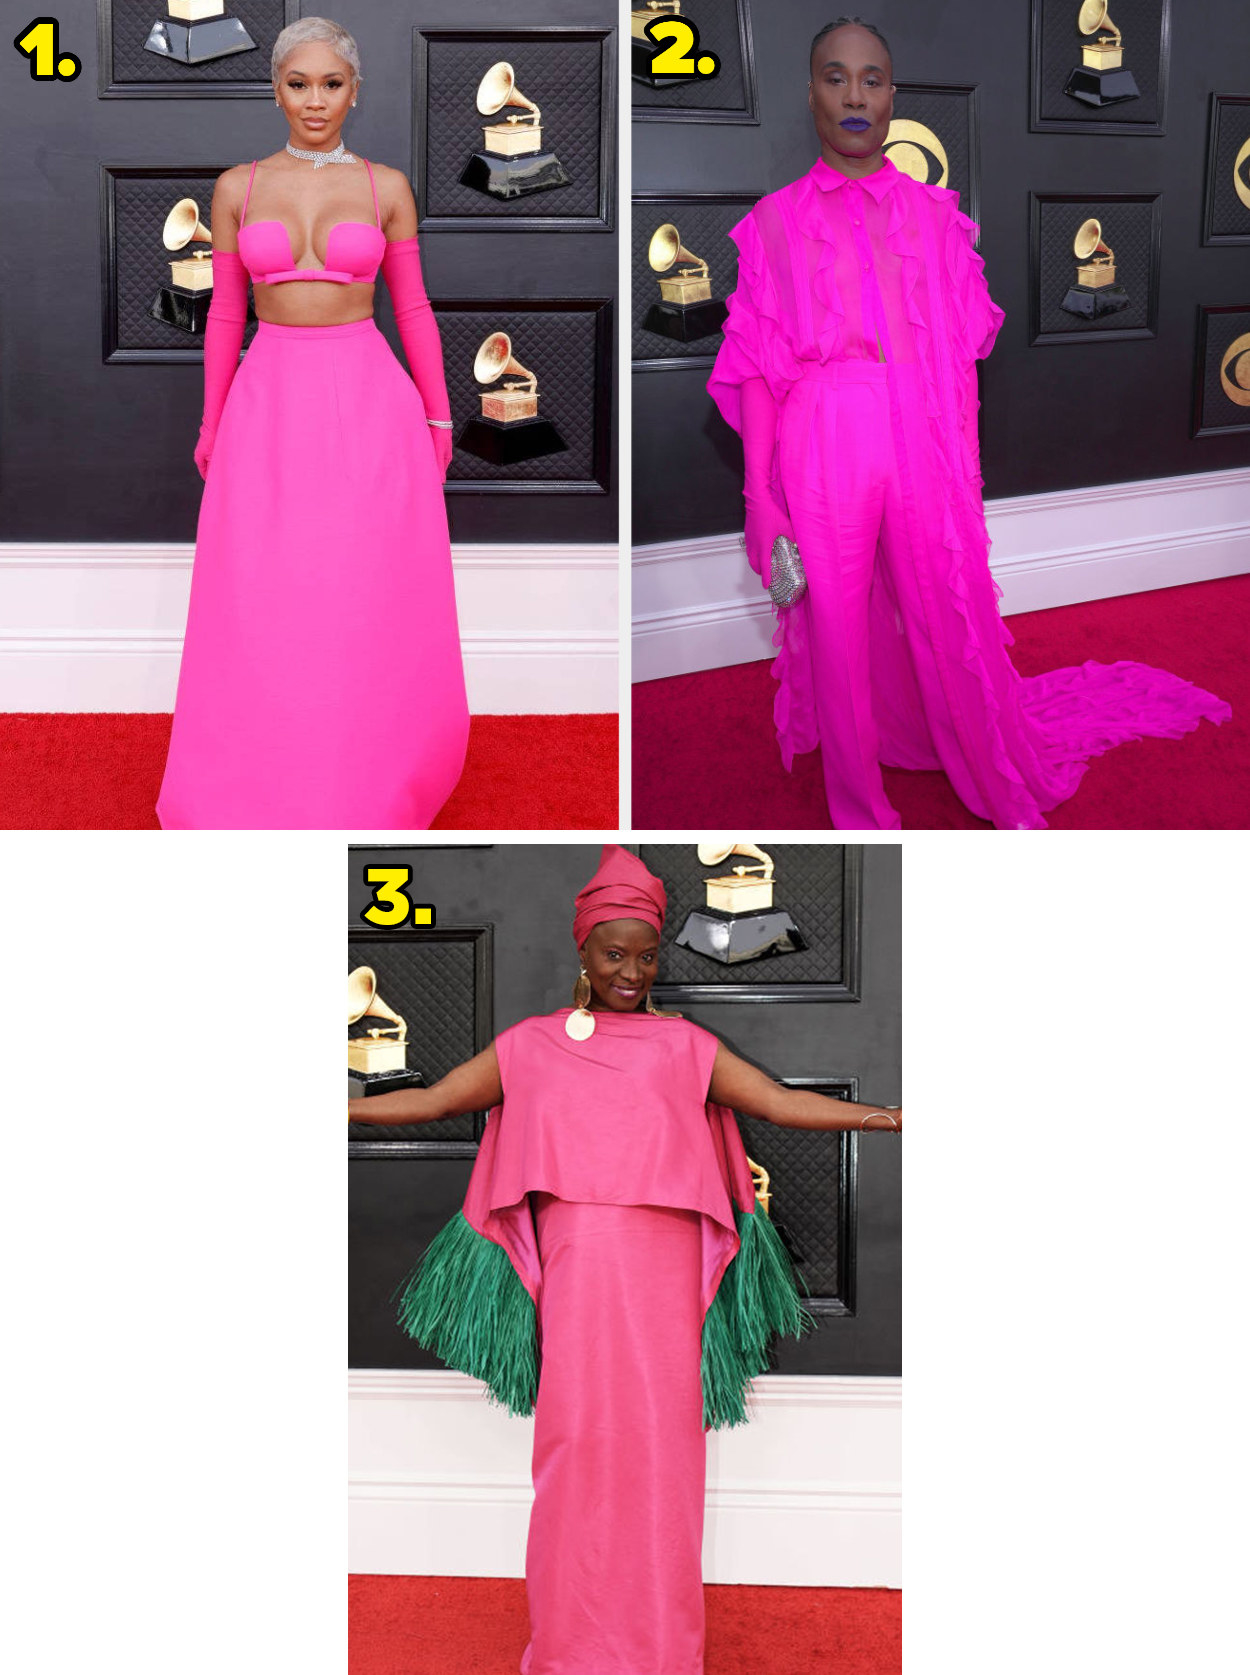 1. A two-piece gown with a crop top and full A-line skirt. 2. A monochromatic outfit with a sheer top, matching cape, and dress pants. 3. A long pink tiered gown with colored fringe and a matching head scarf.